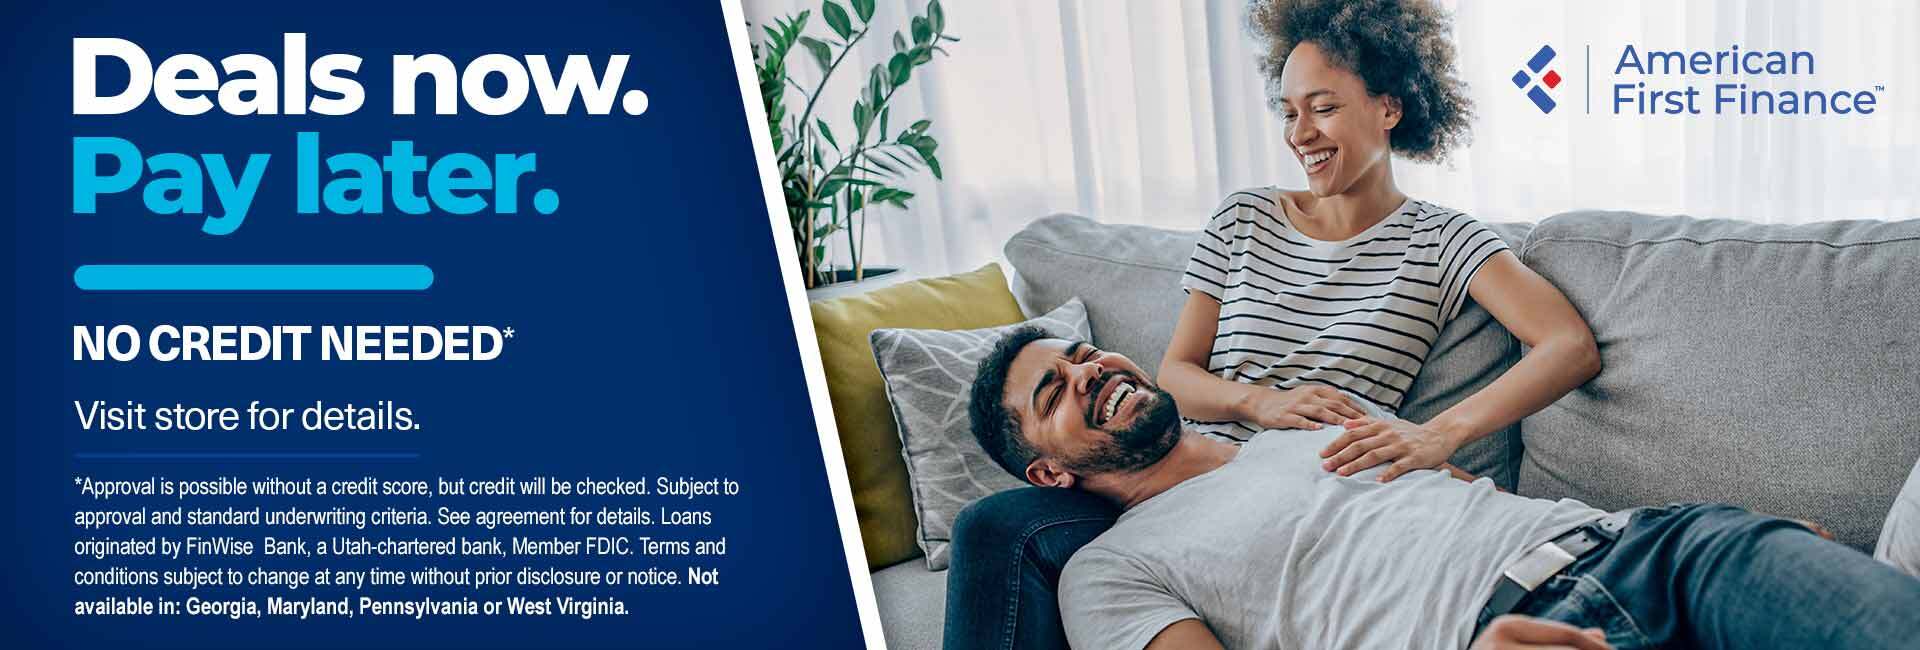 A designed banner with an image of a man resting his head in a woman’s lap, sitting on a couch together, with text that reads “Deals now. Pay later. No credit Needed*. Apply now.” Asterisk text reads American First Finance: “*Approval is possible without a credit score, but credit will be checked. Subject to approval. Restrictions apply. Not available in GA, MD, PA, or WV.